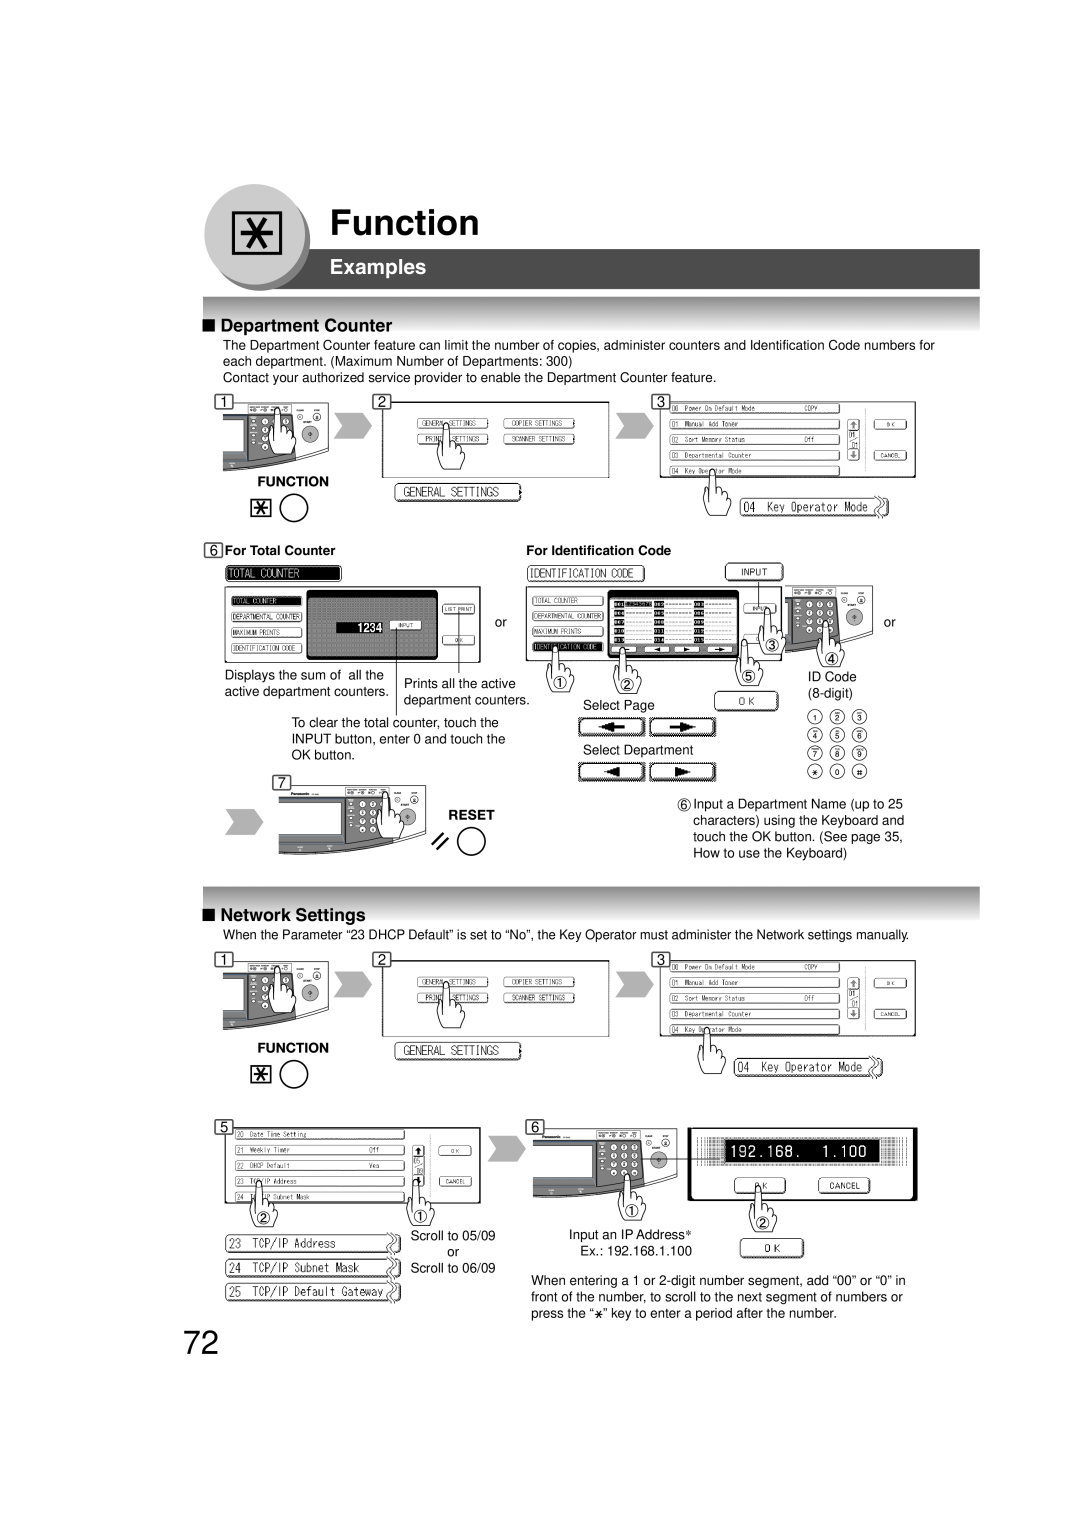 Panasonic 4520, 6020 Department Counter, Network Settings, Function, Examples, For Total Counter, For Identification Code 